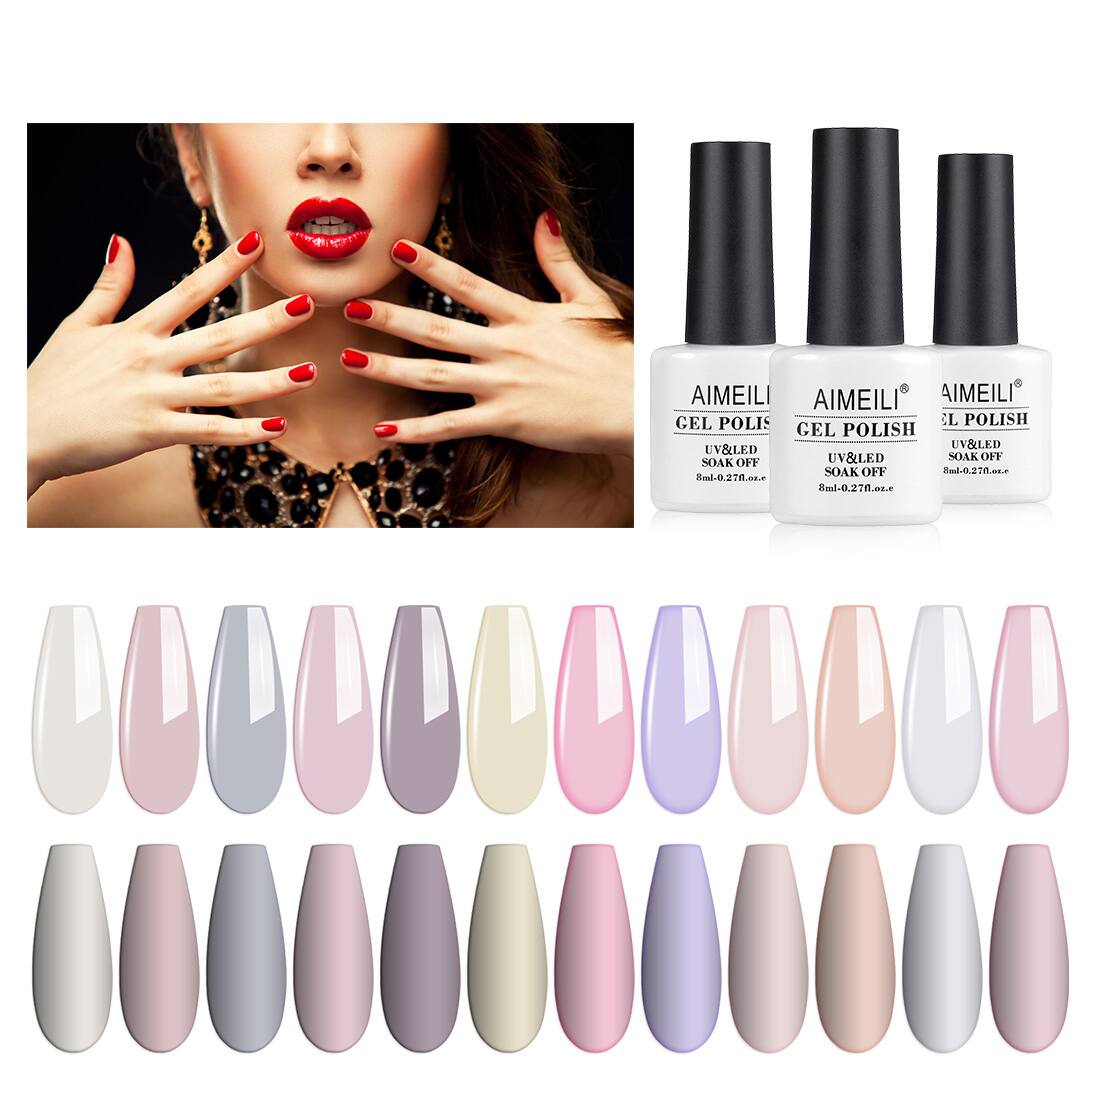 AIMEILI Pink Nude White Color Gel Nail Polish Set Of 12pcs for - $9.89 + Free Shipping w/ Amazon Prime or Orders $25+